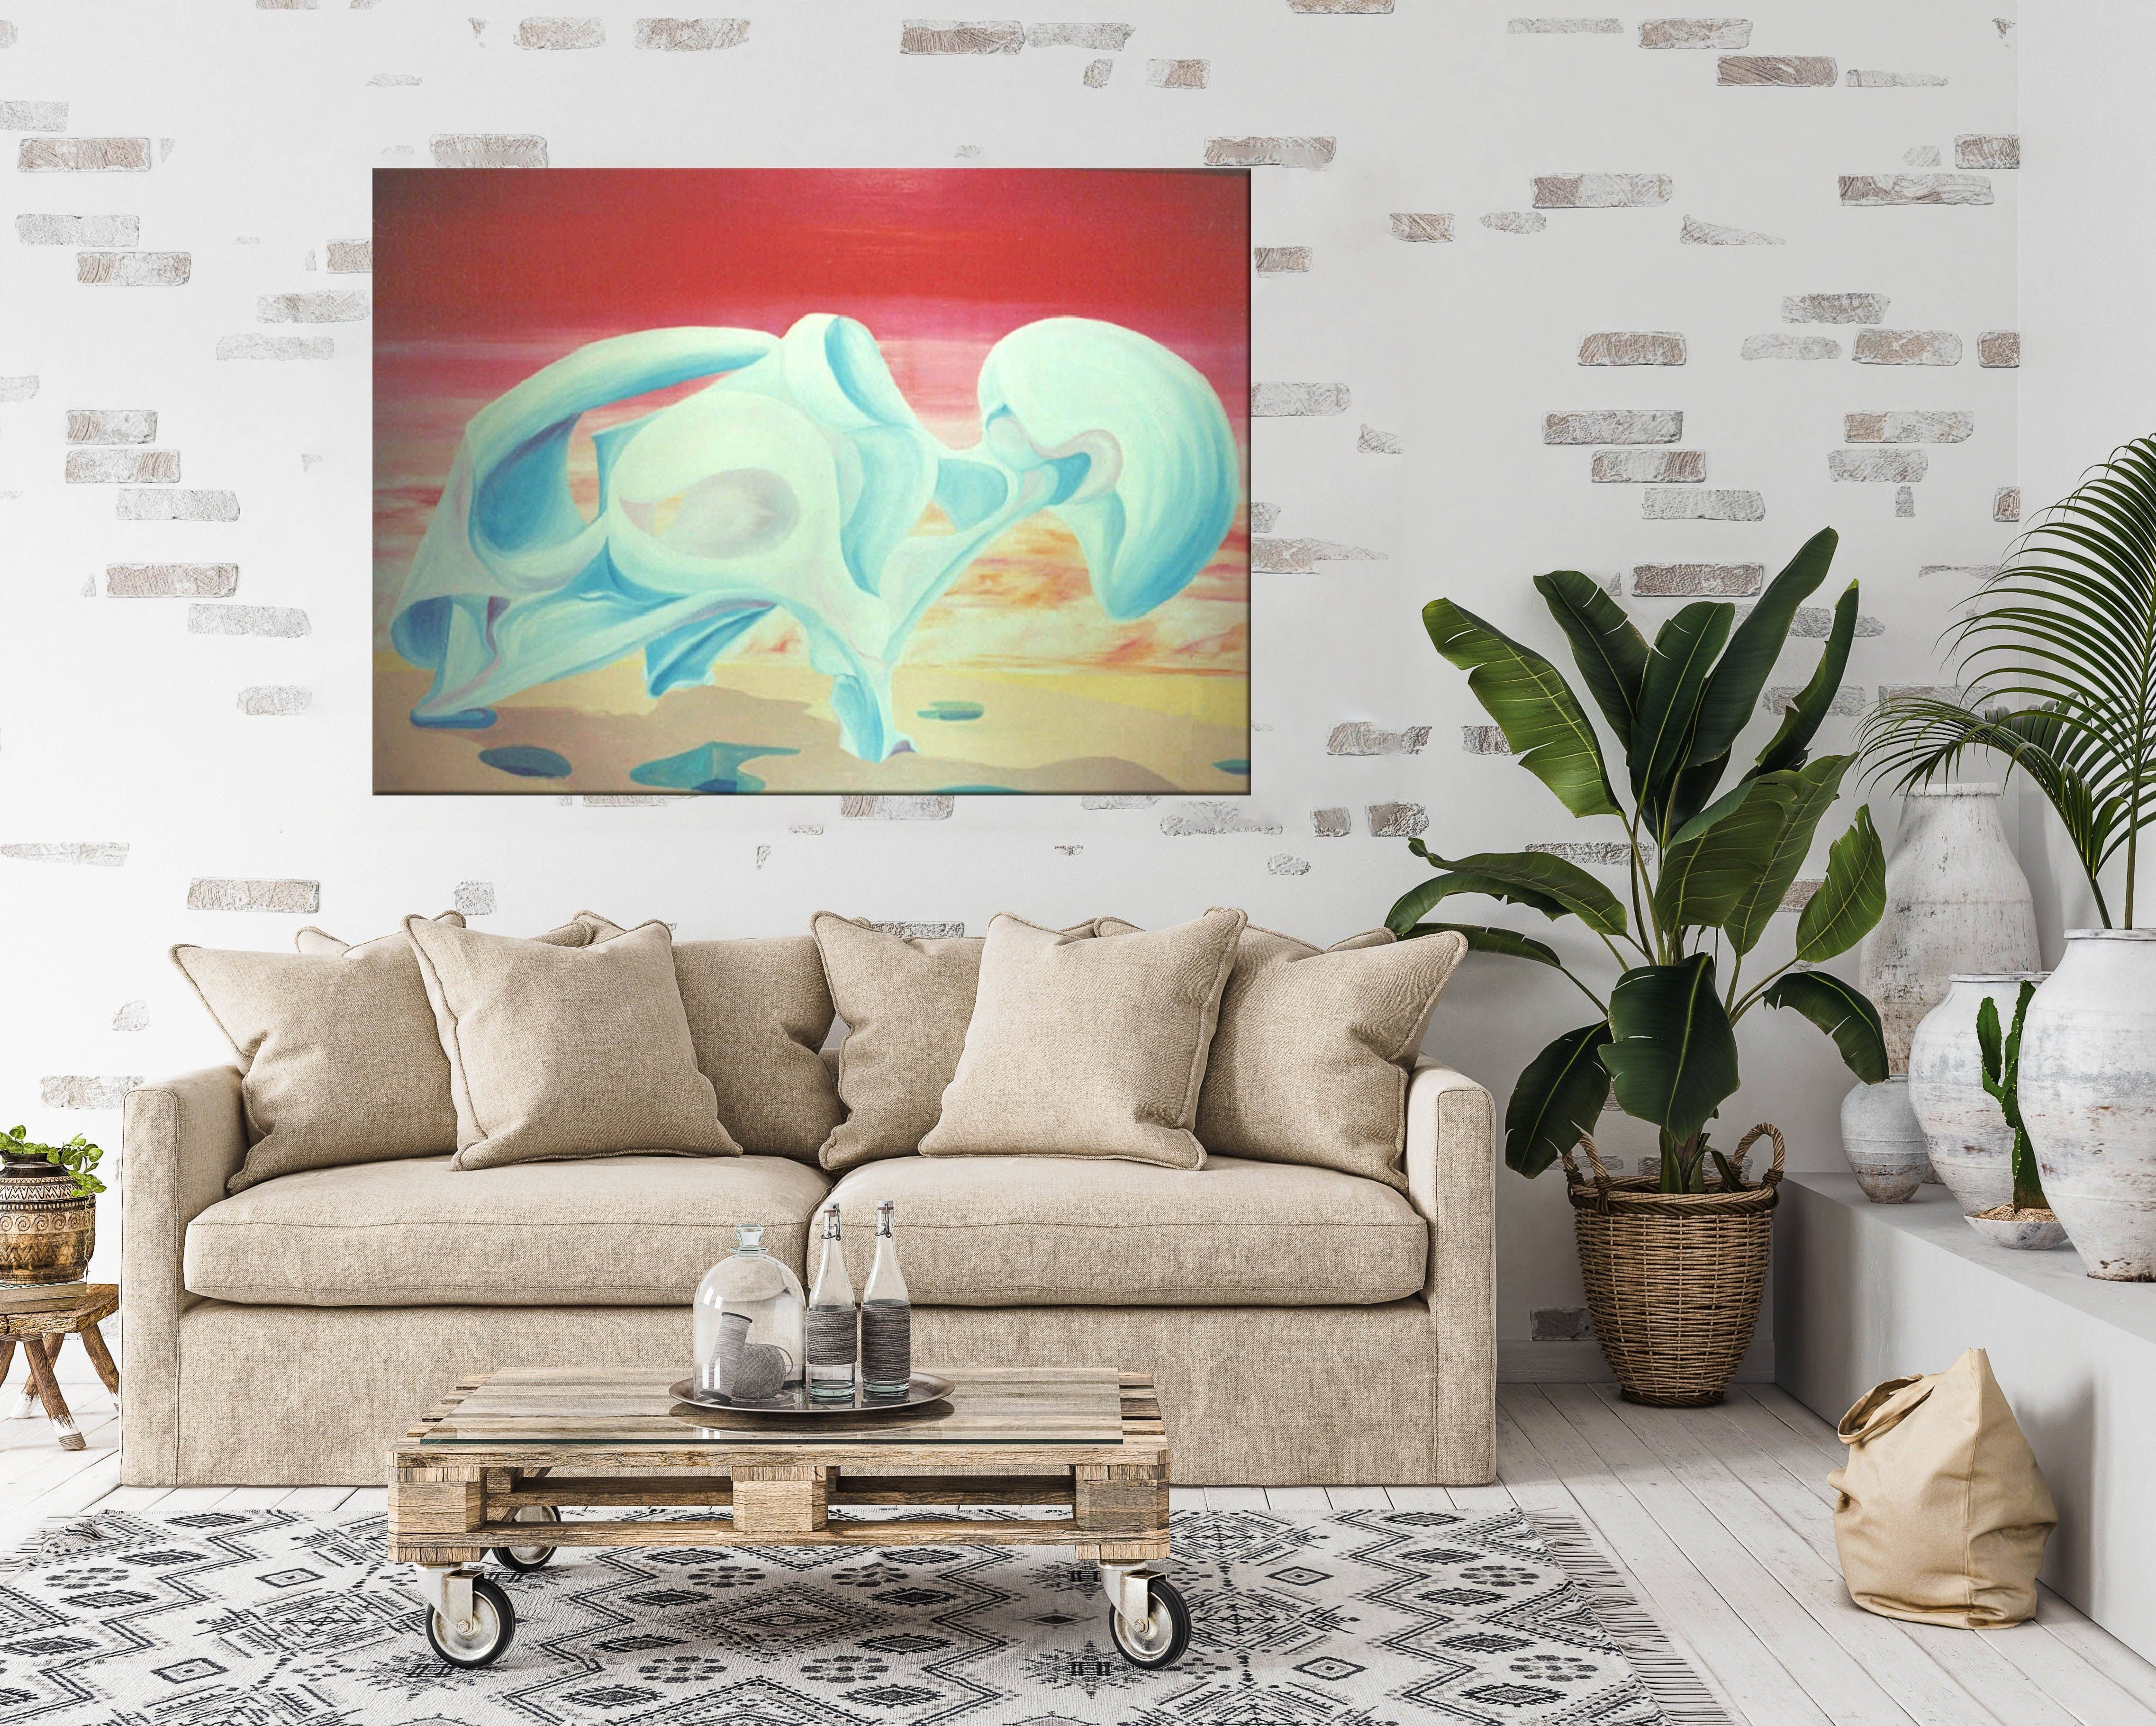 Painting of Diamond displayed in a rustic living room on the wall